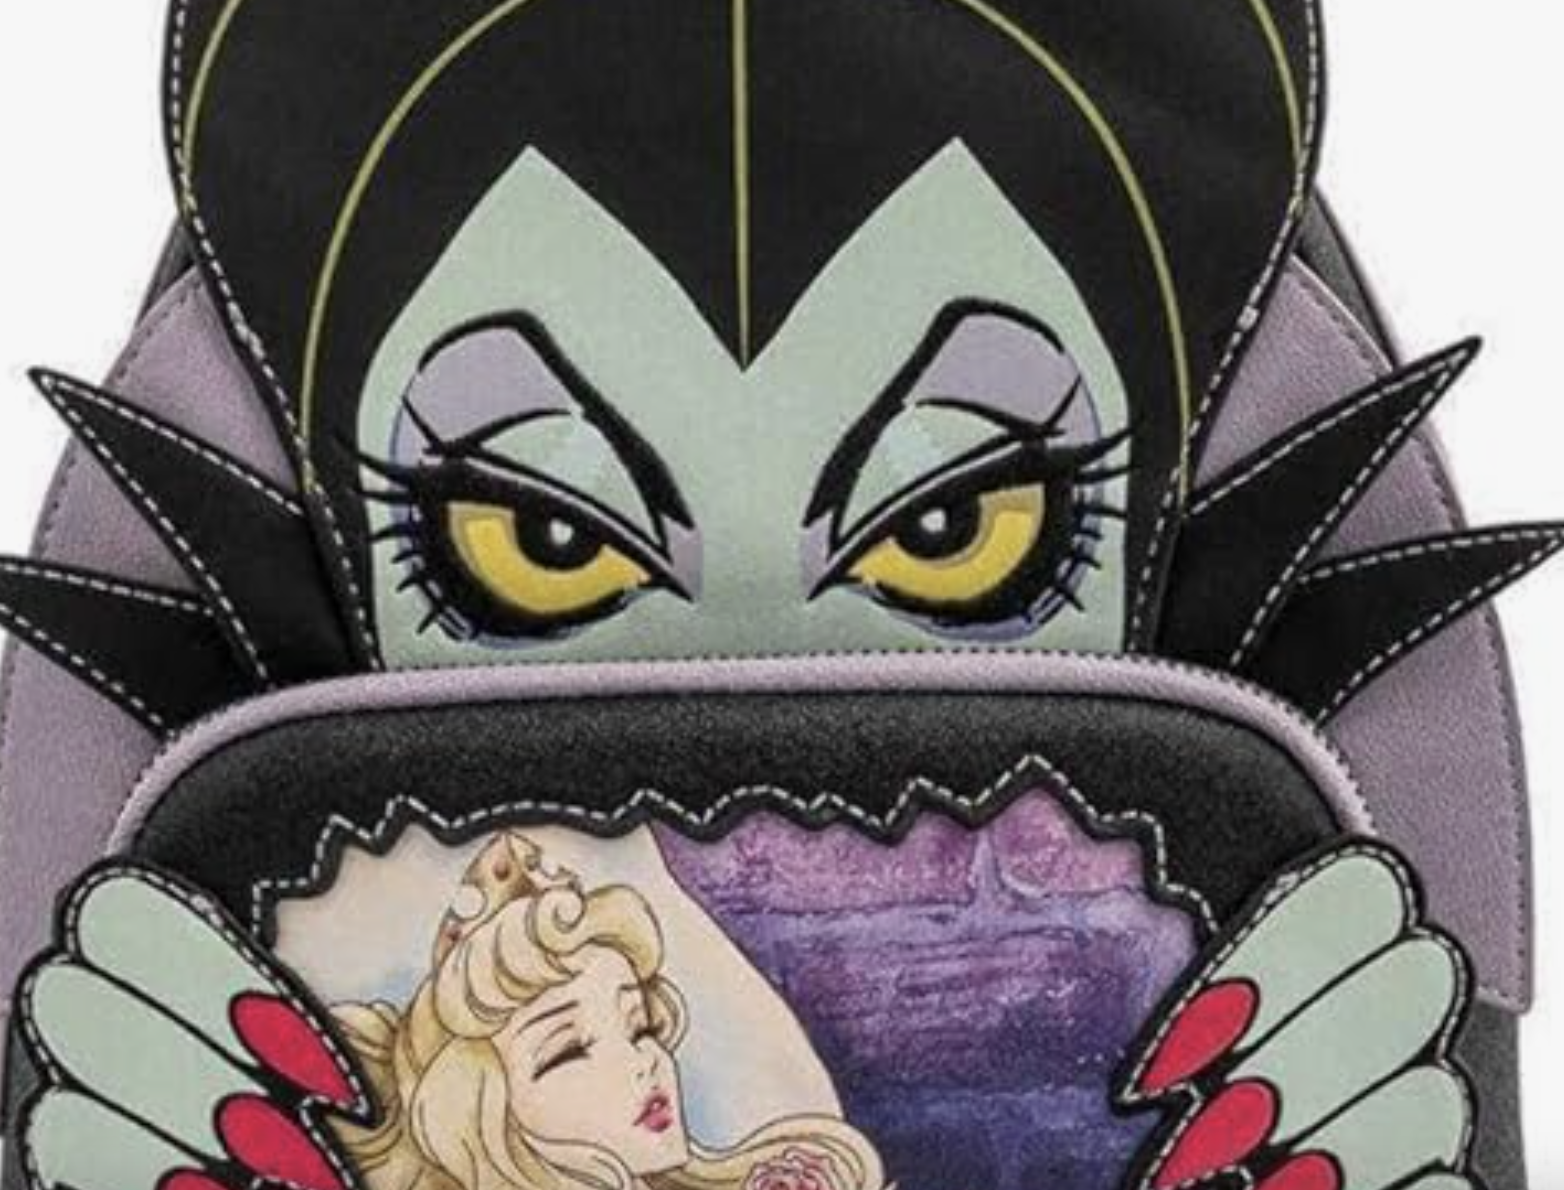 7 Disney Villain Loungefly Bags You Need To Bring to Disney World